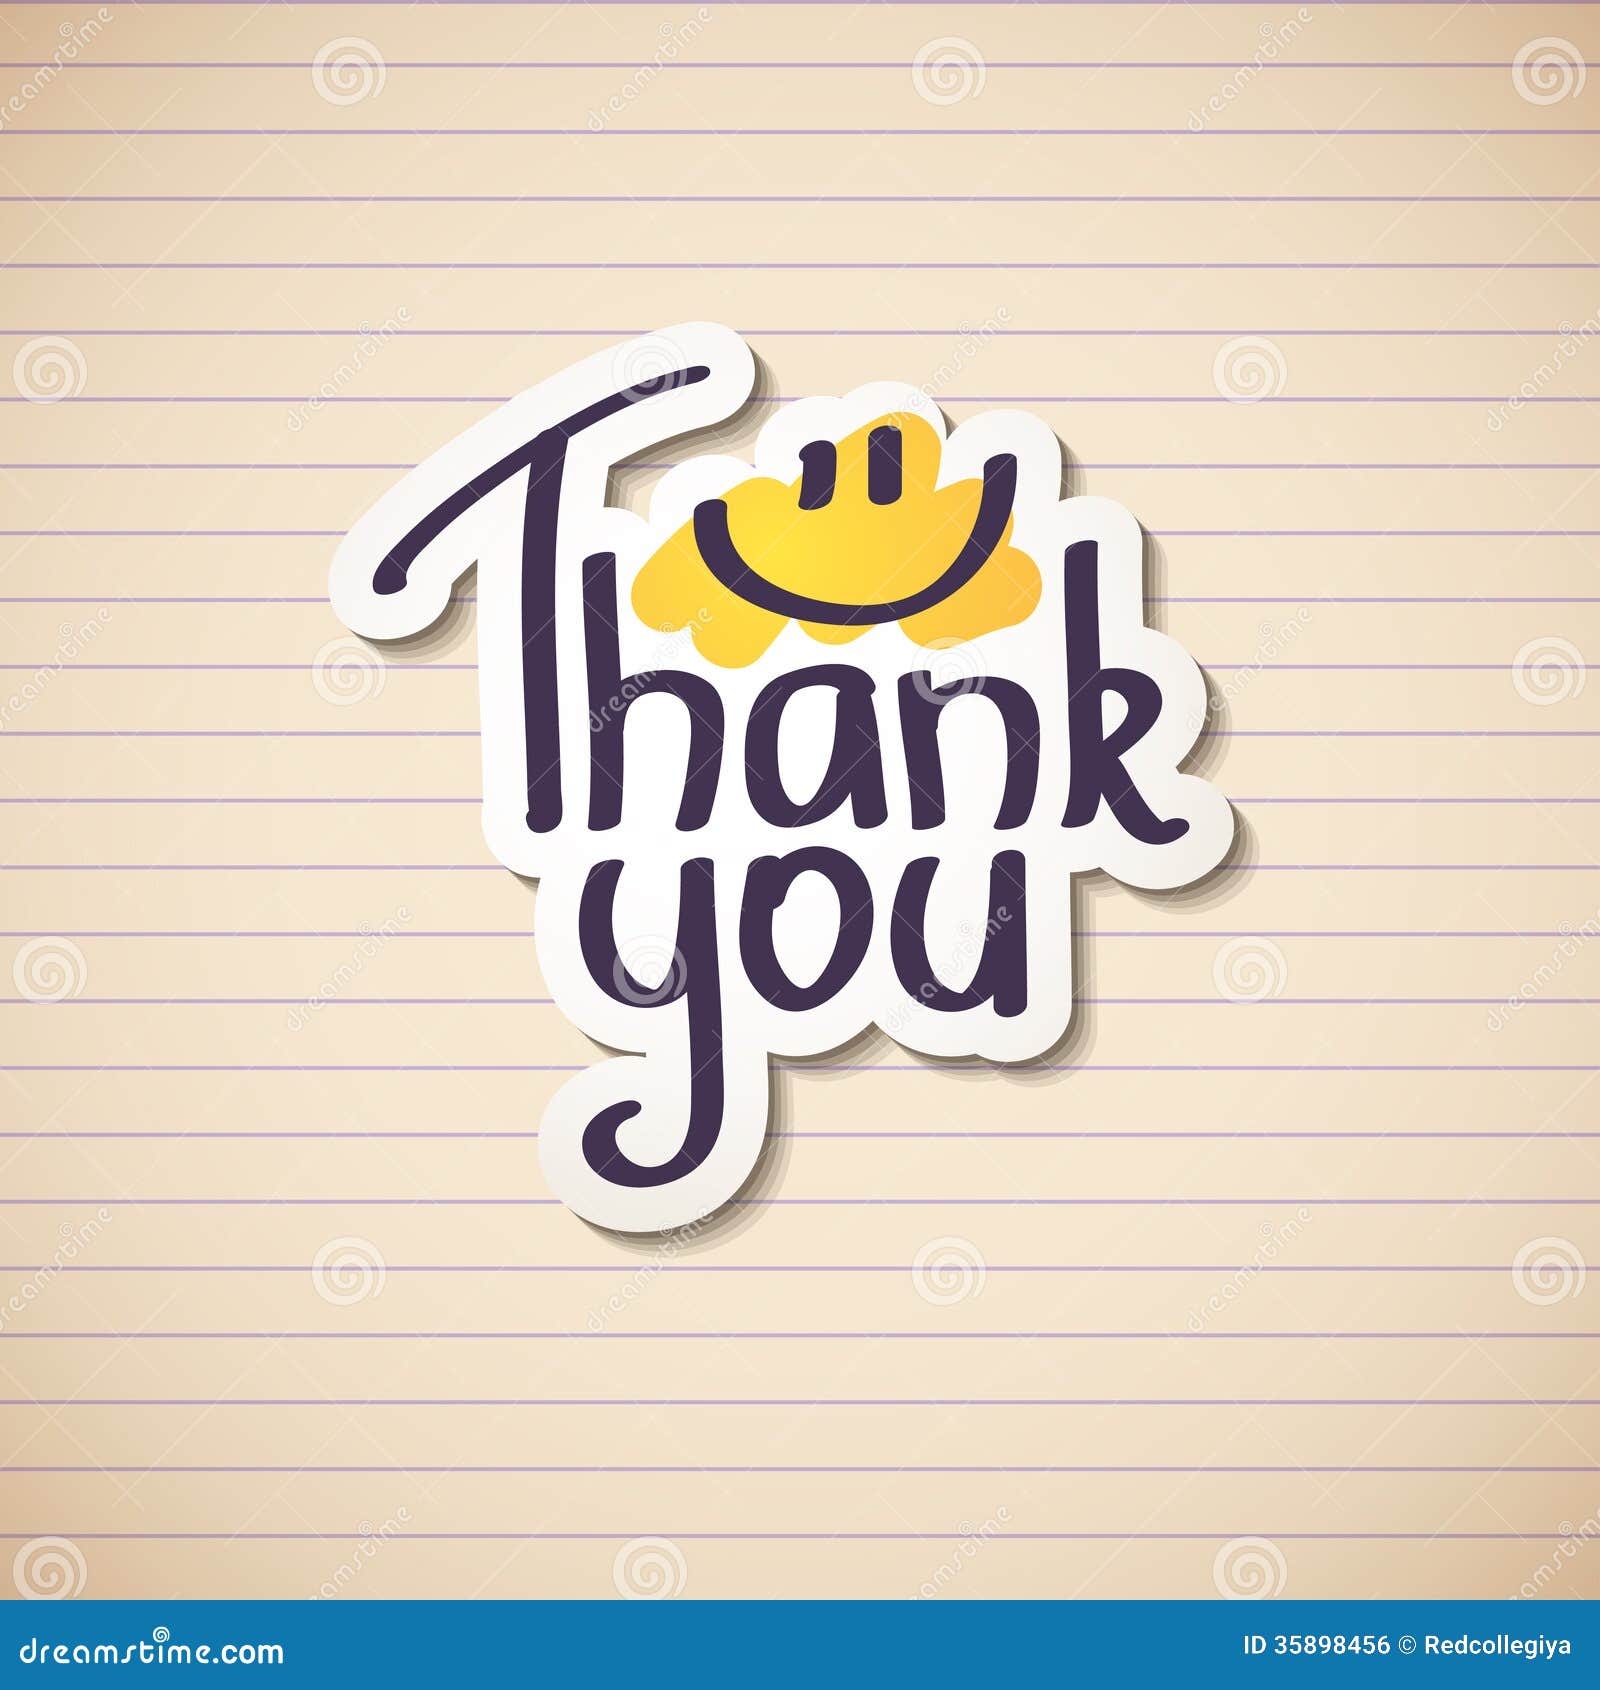 vector free download thank you - photo #45